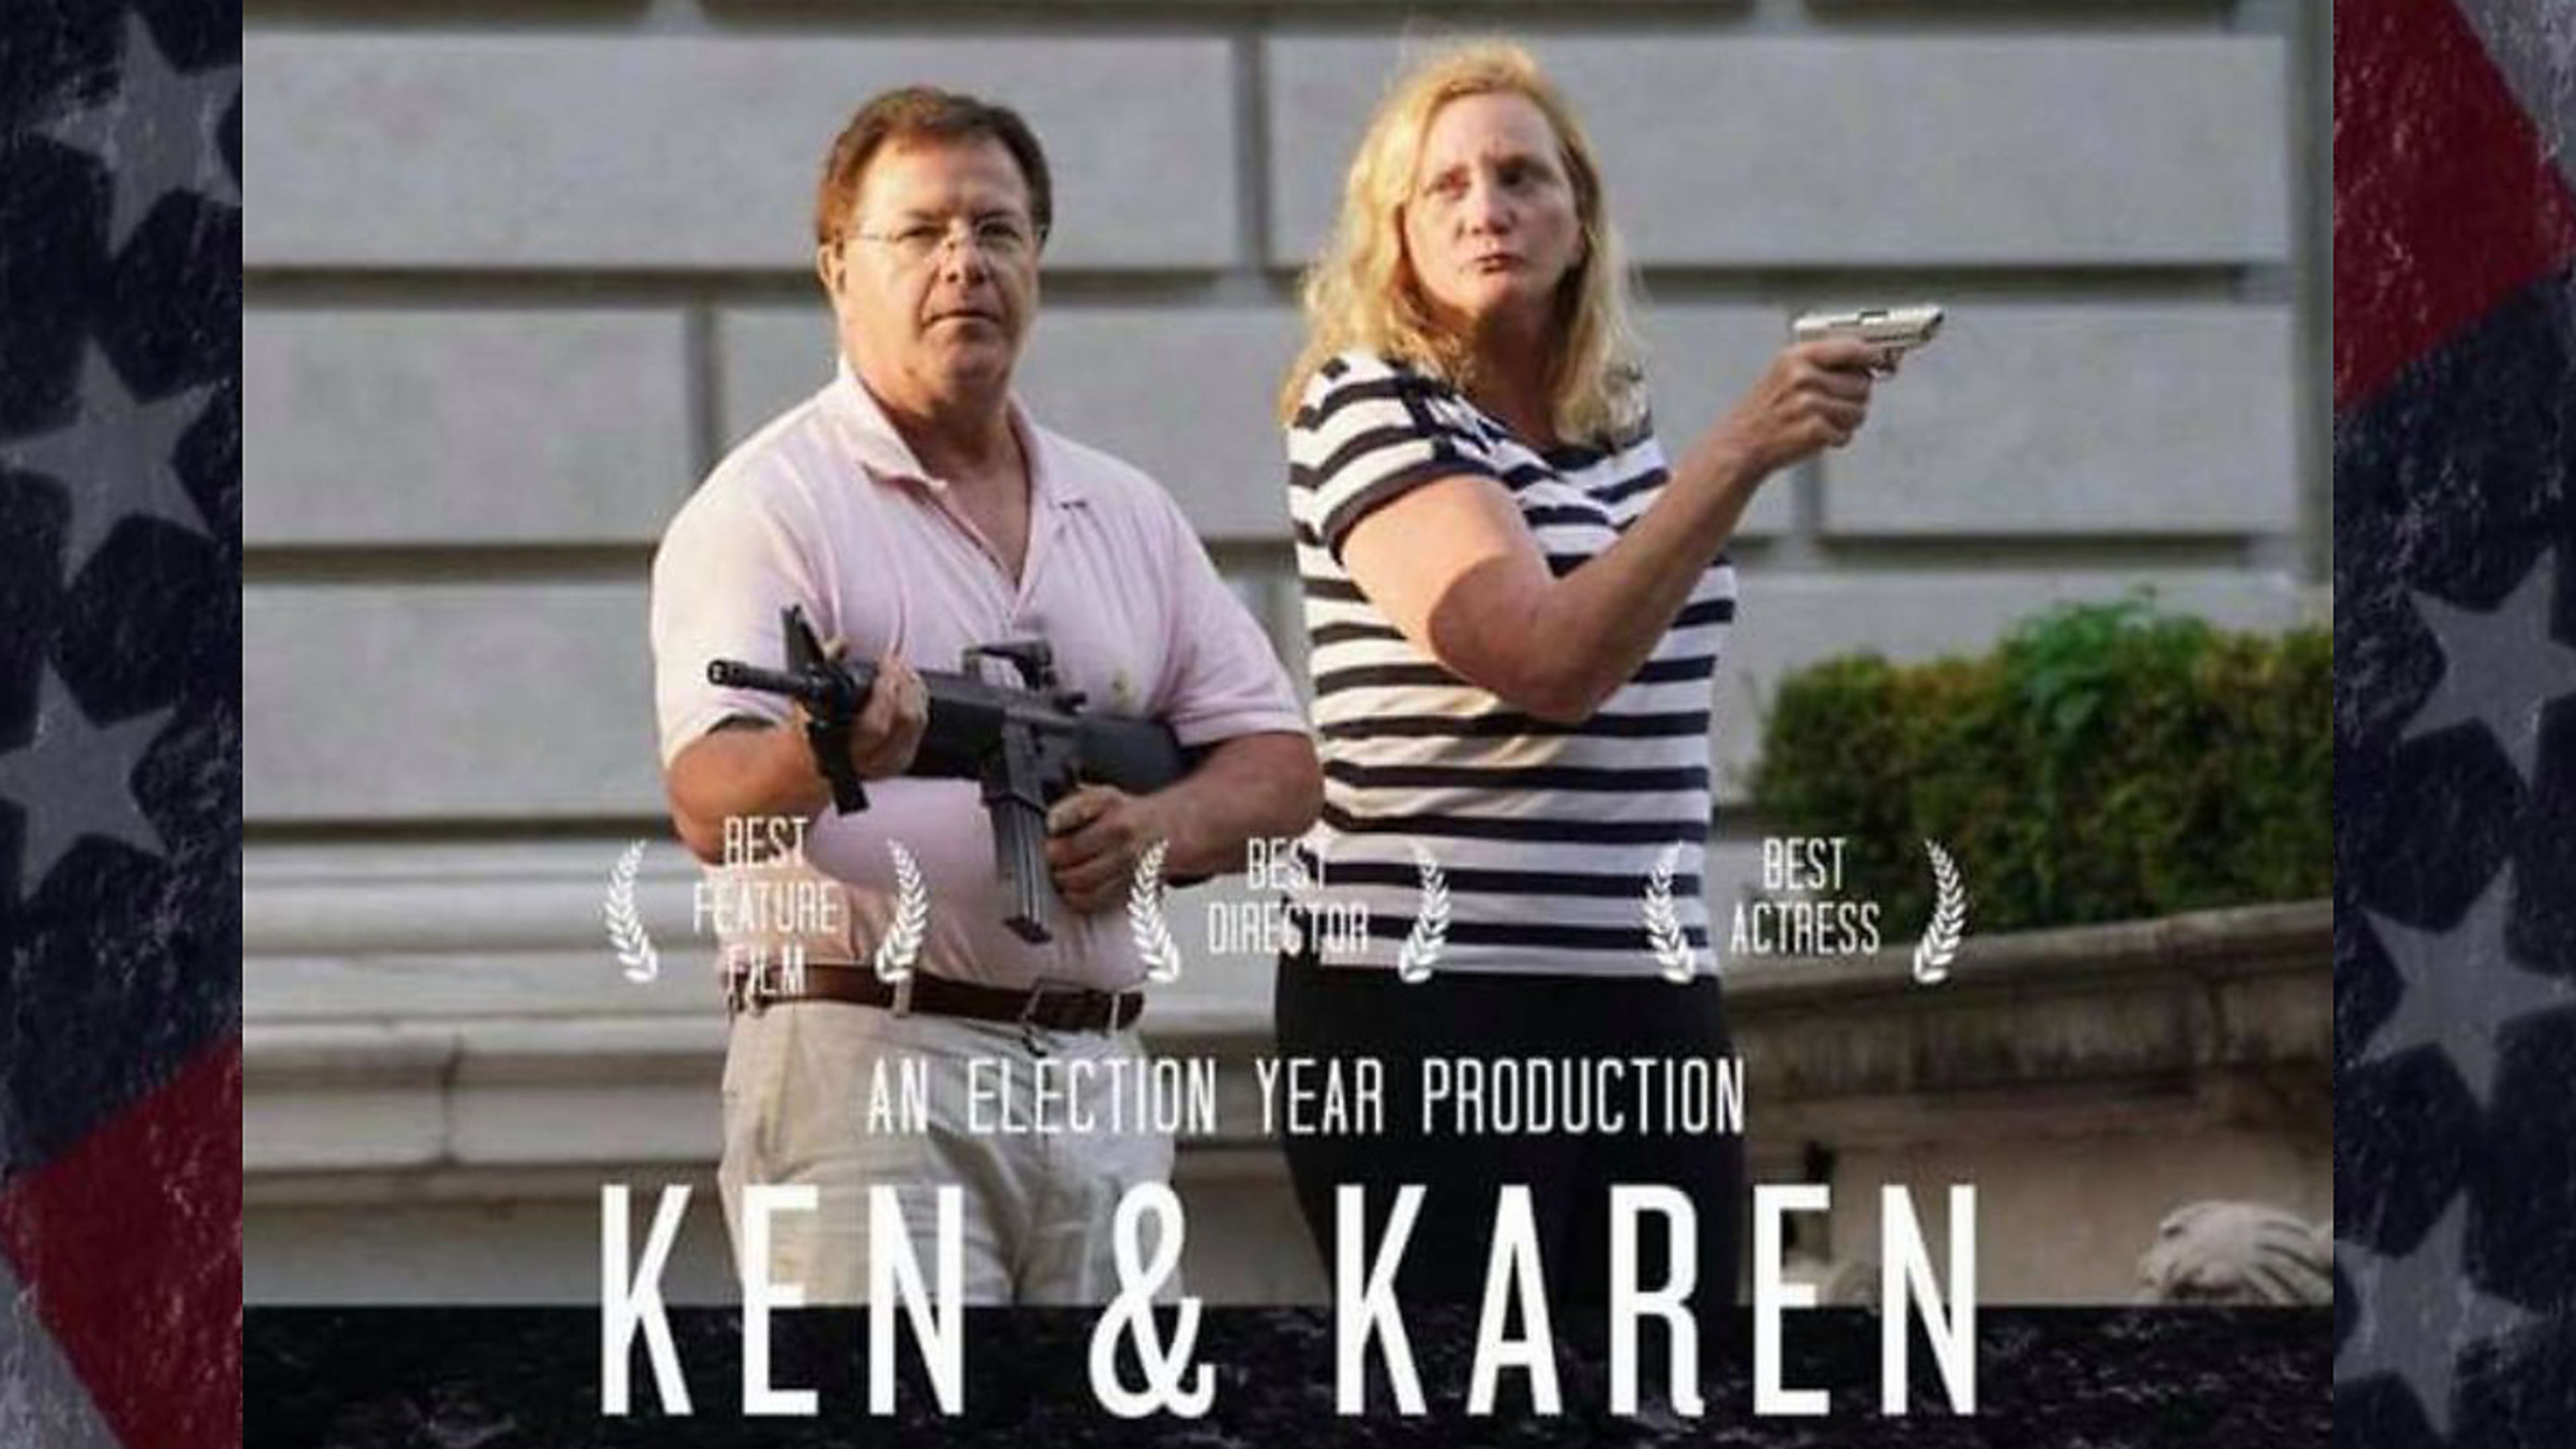 ‘Ken and Karen,’ the wealthy couple who pulled guns on protesters, inspired some genius memes